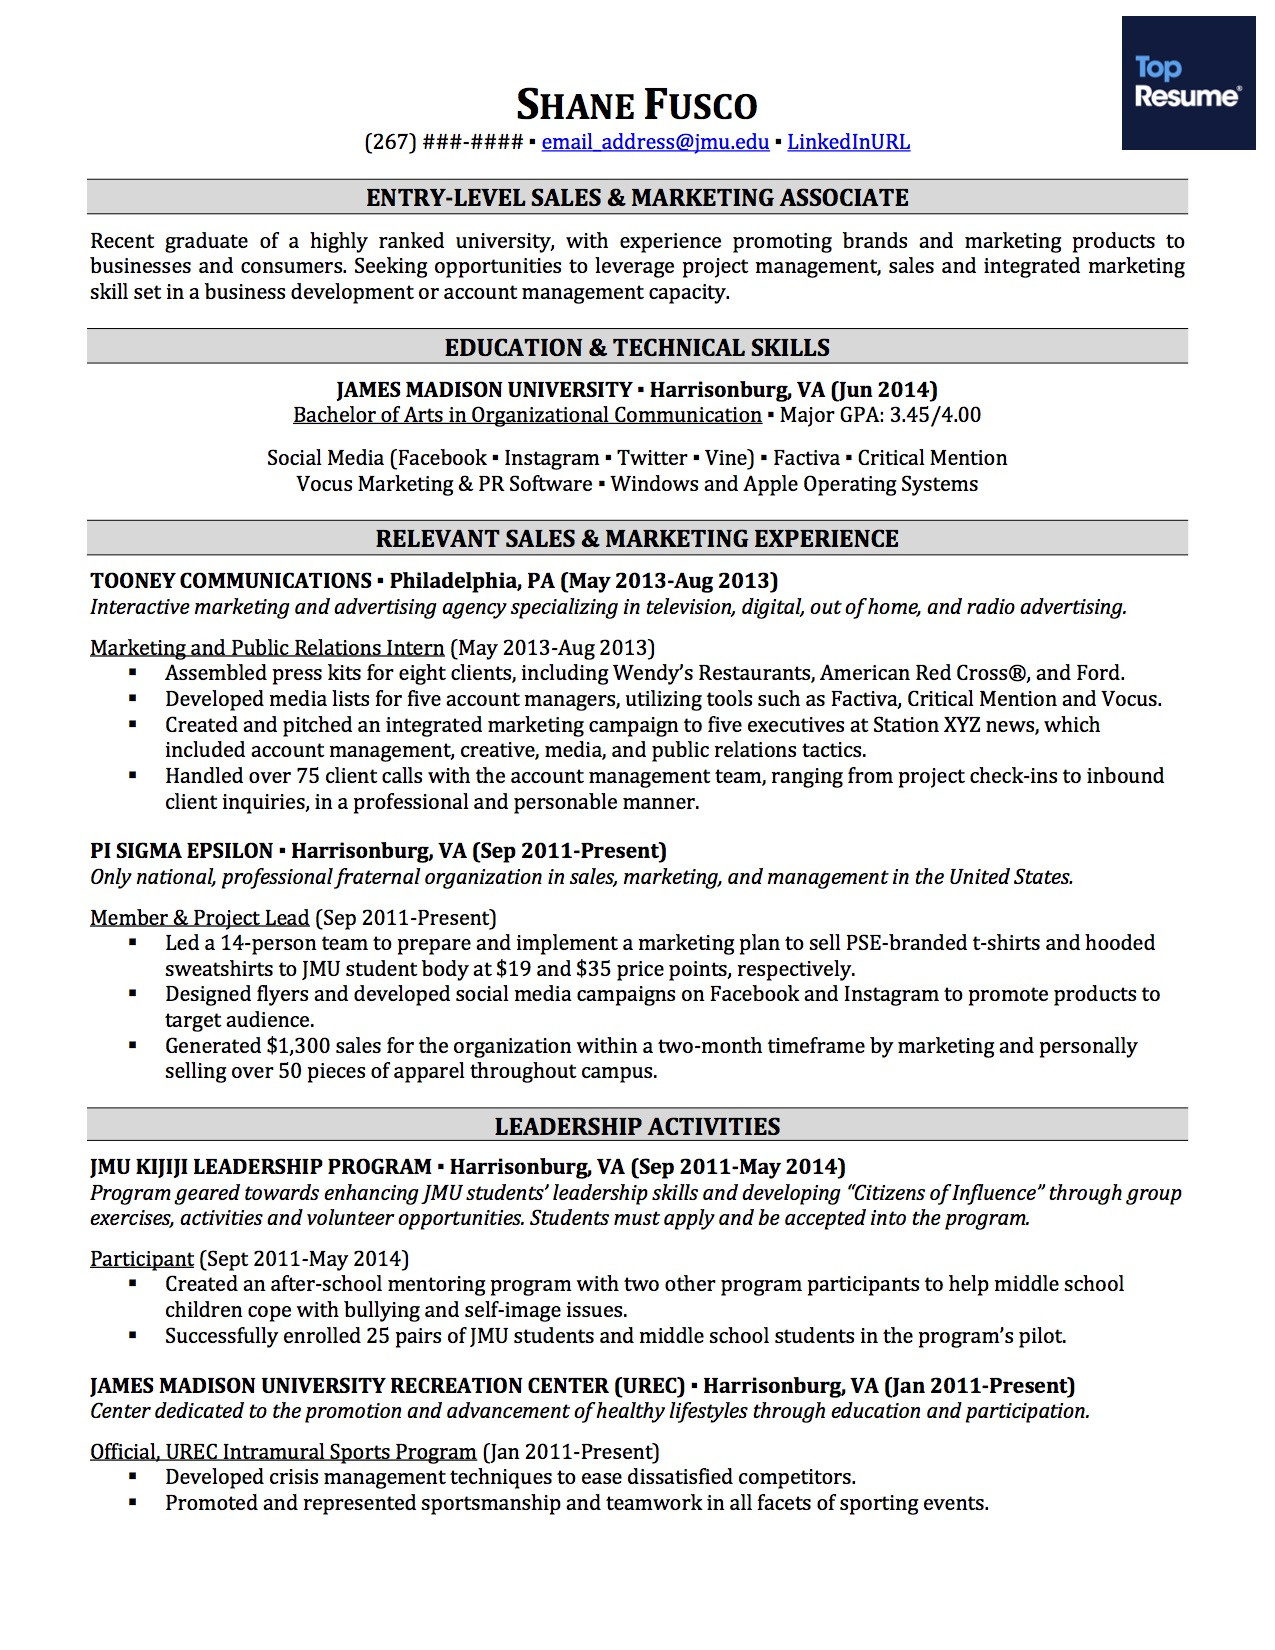 Sample Resume if You Never Had A Job How to Write A Resume with No Experience topresume